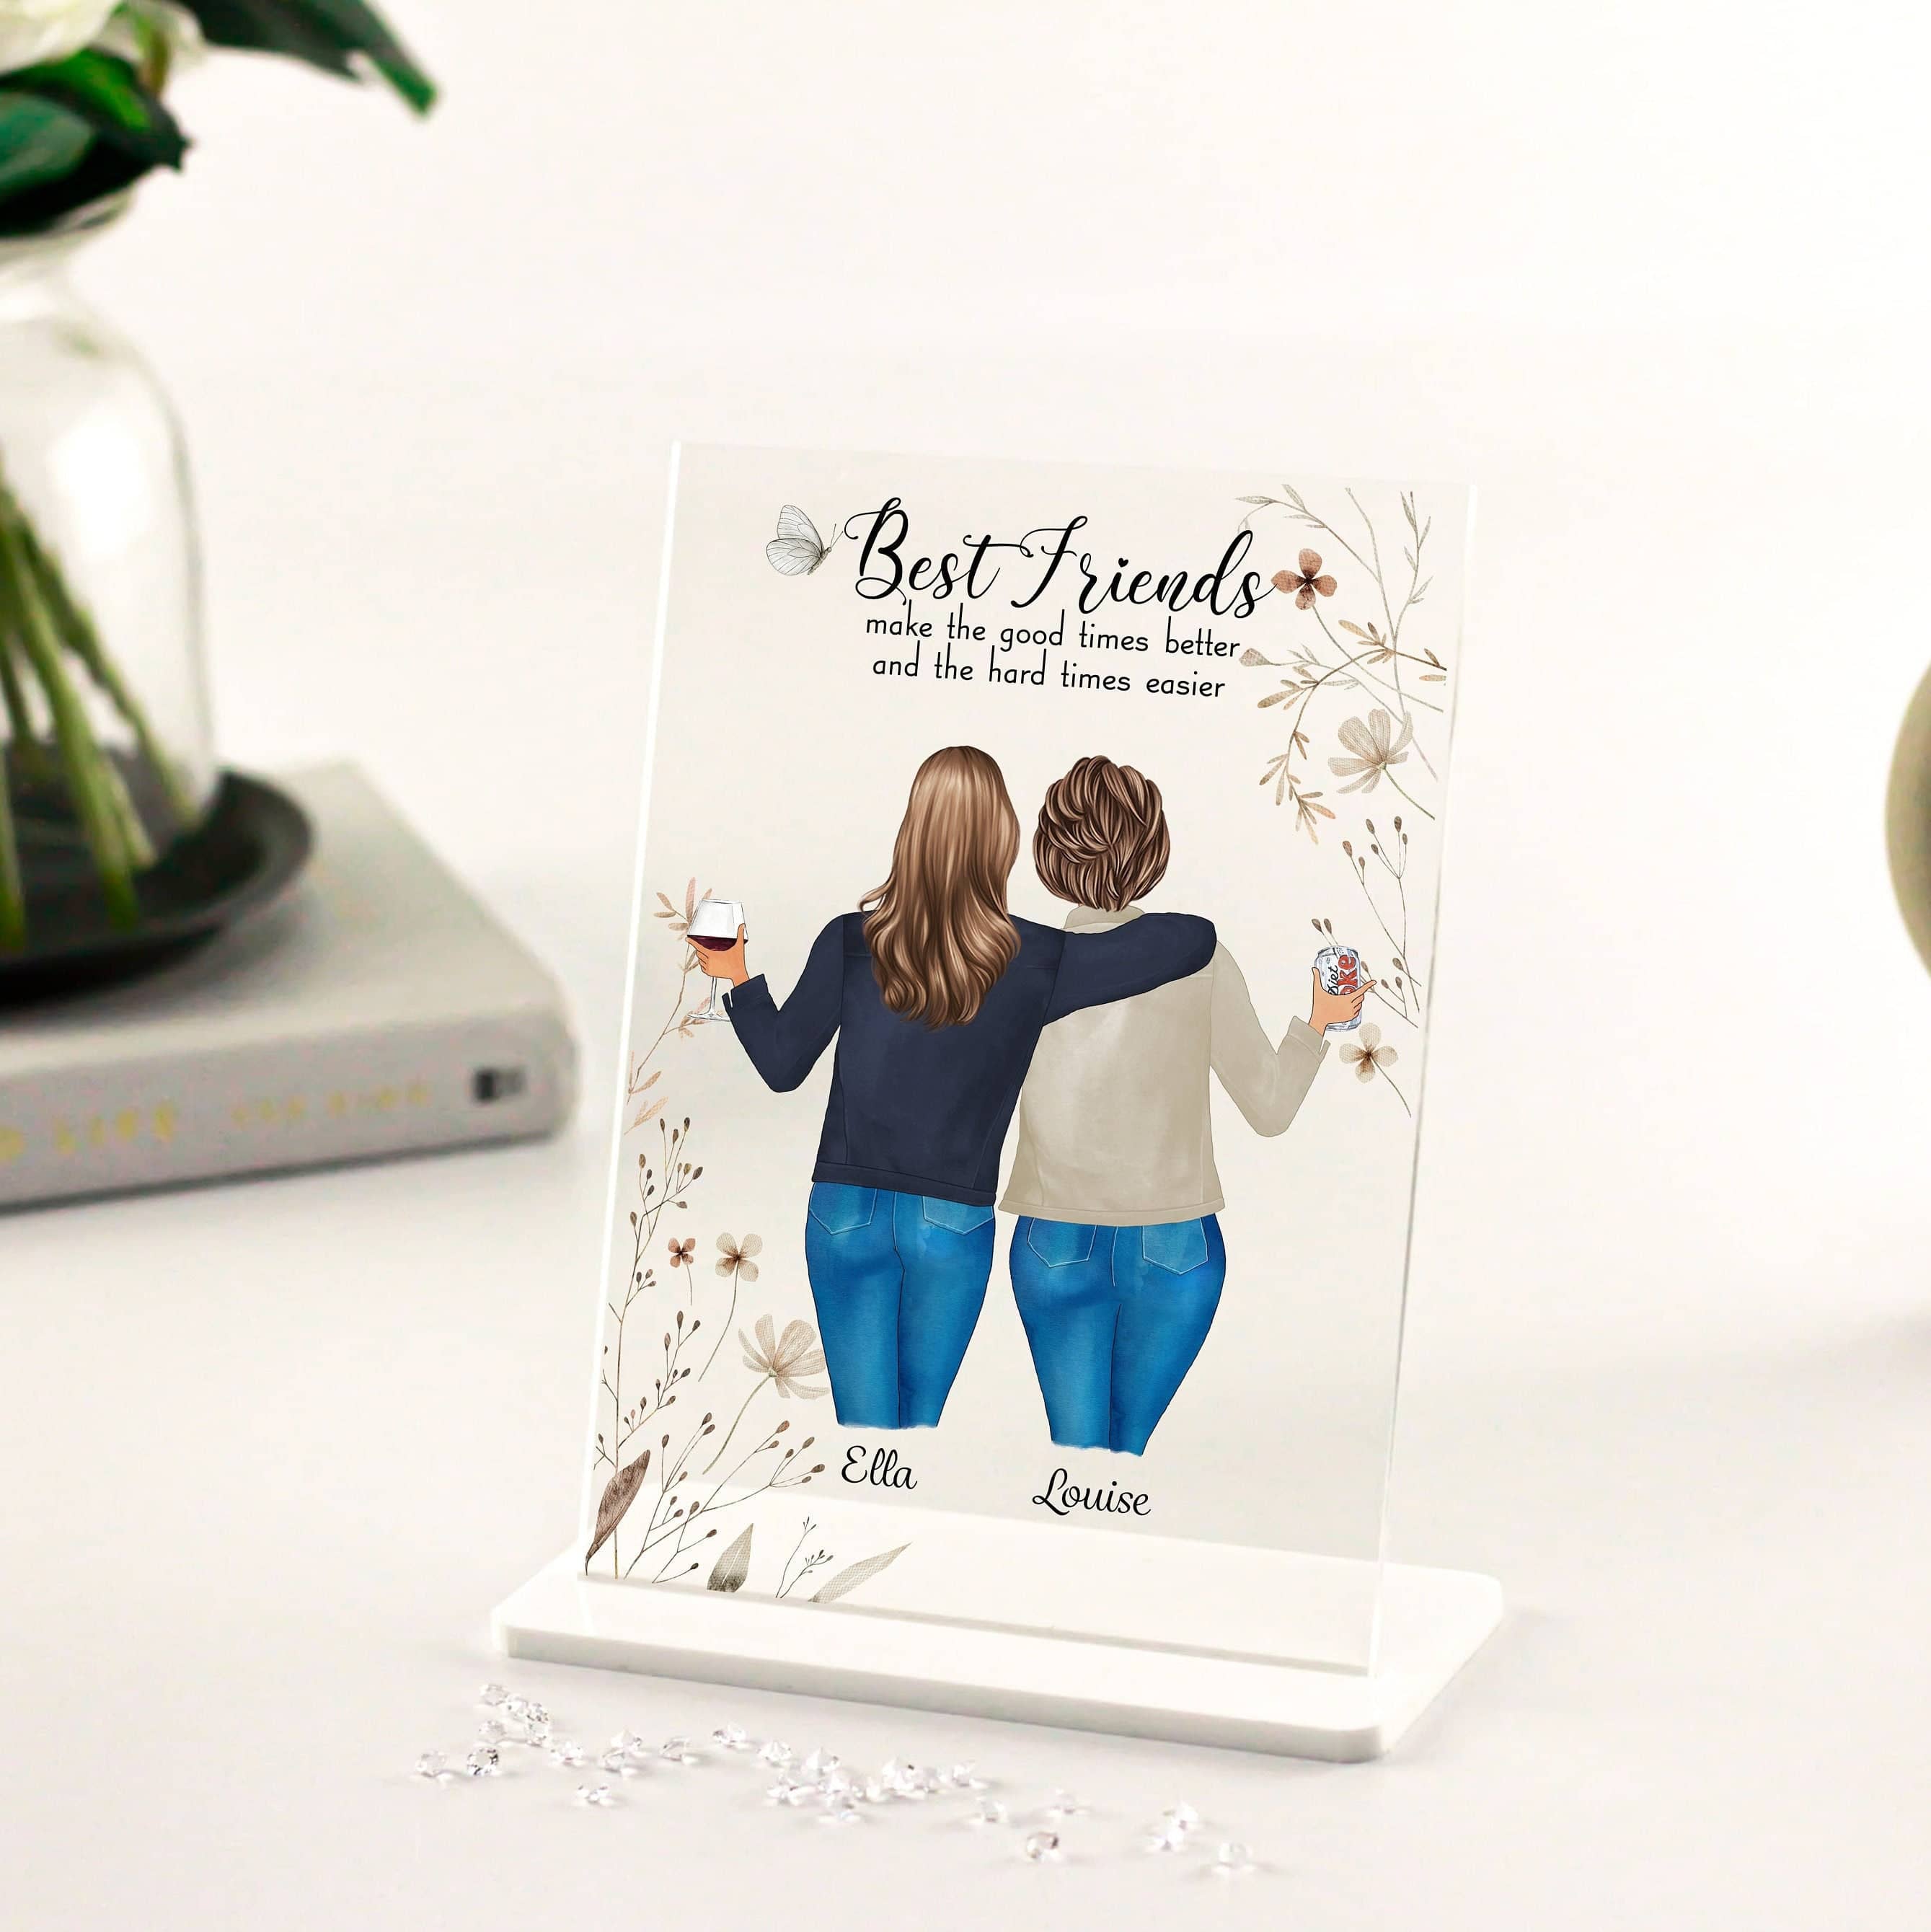 Best Friend Print, Personalised Gift for Her, Bestie Gifts, Birthday Gift for Friend, Christmas Gift, Friendship Gift, Acrylic Plaque